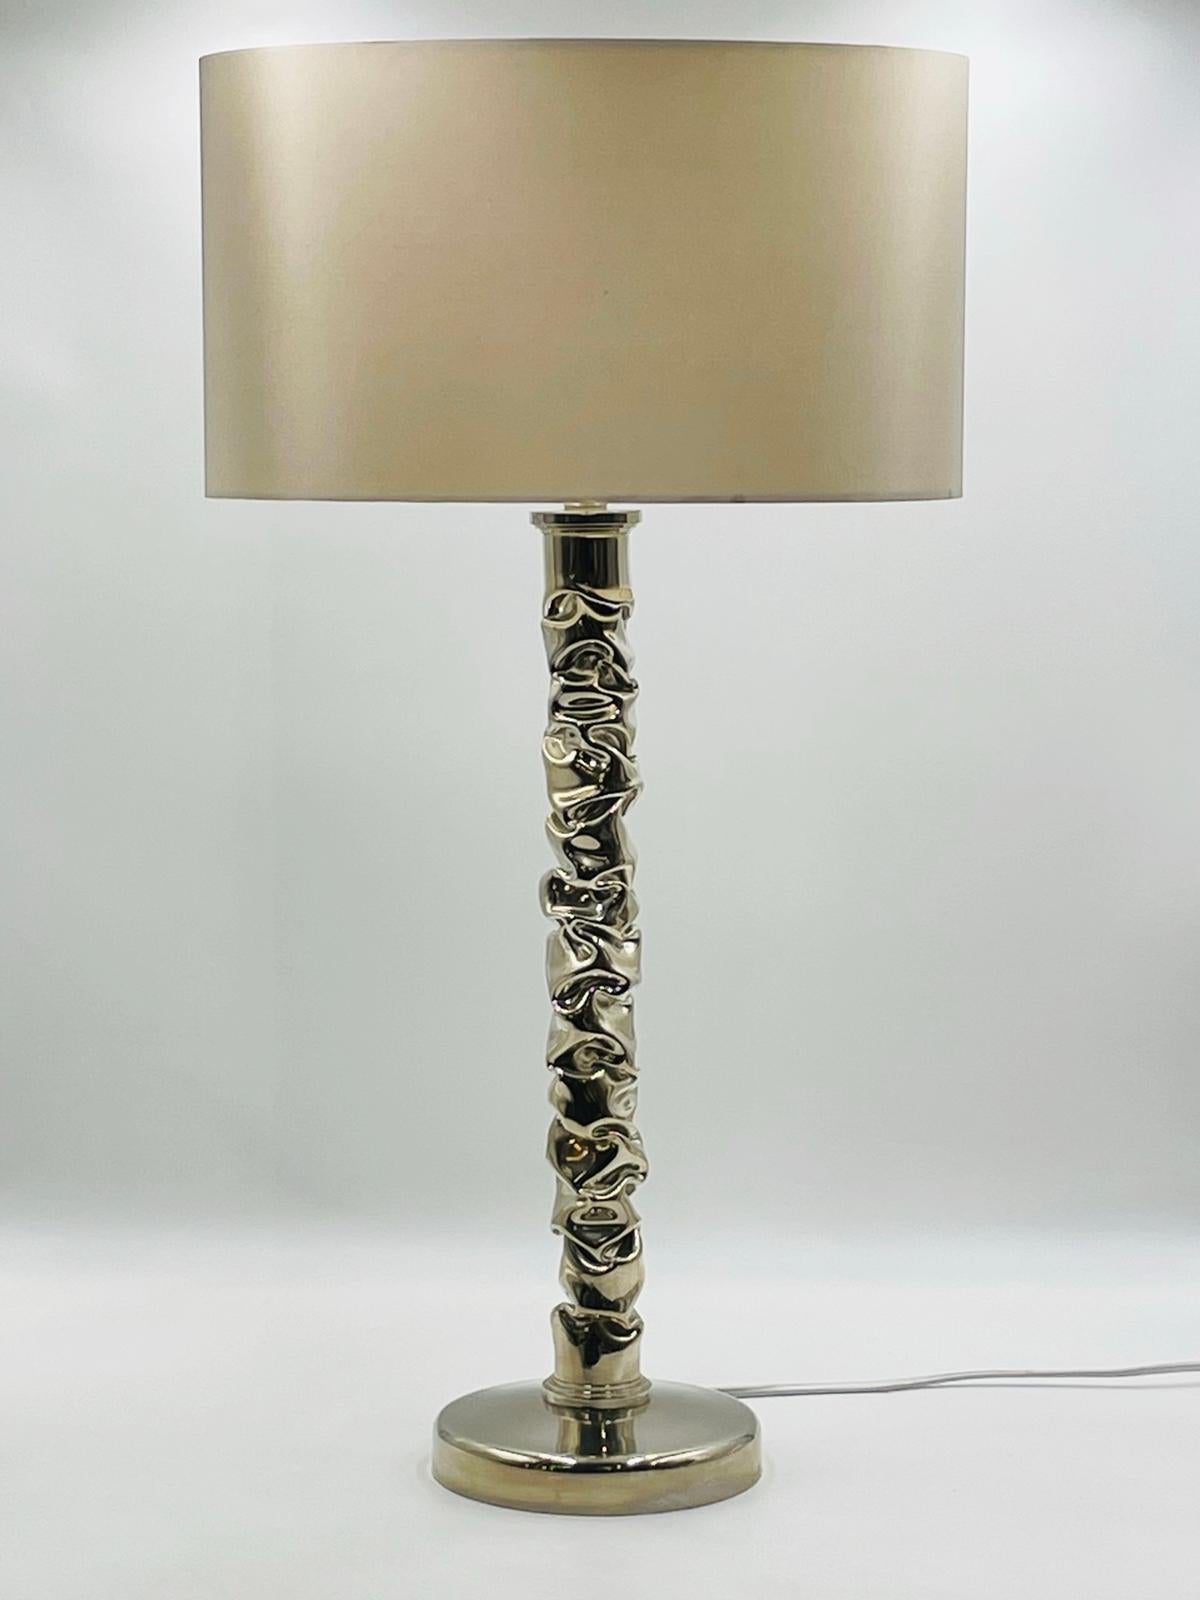 Introducing the stunning table lamp in polished nickel, made by the renowned British furniture company Porta Romana. Crafted with meticulous attention to detail, this lamp features a sleek metal base with a polished nickel finish, exuding an elegant